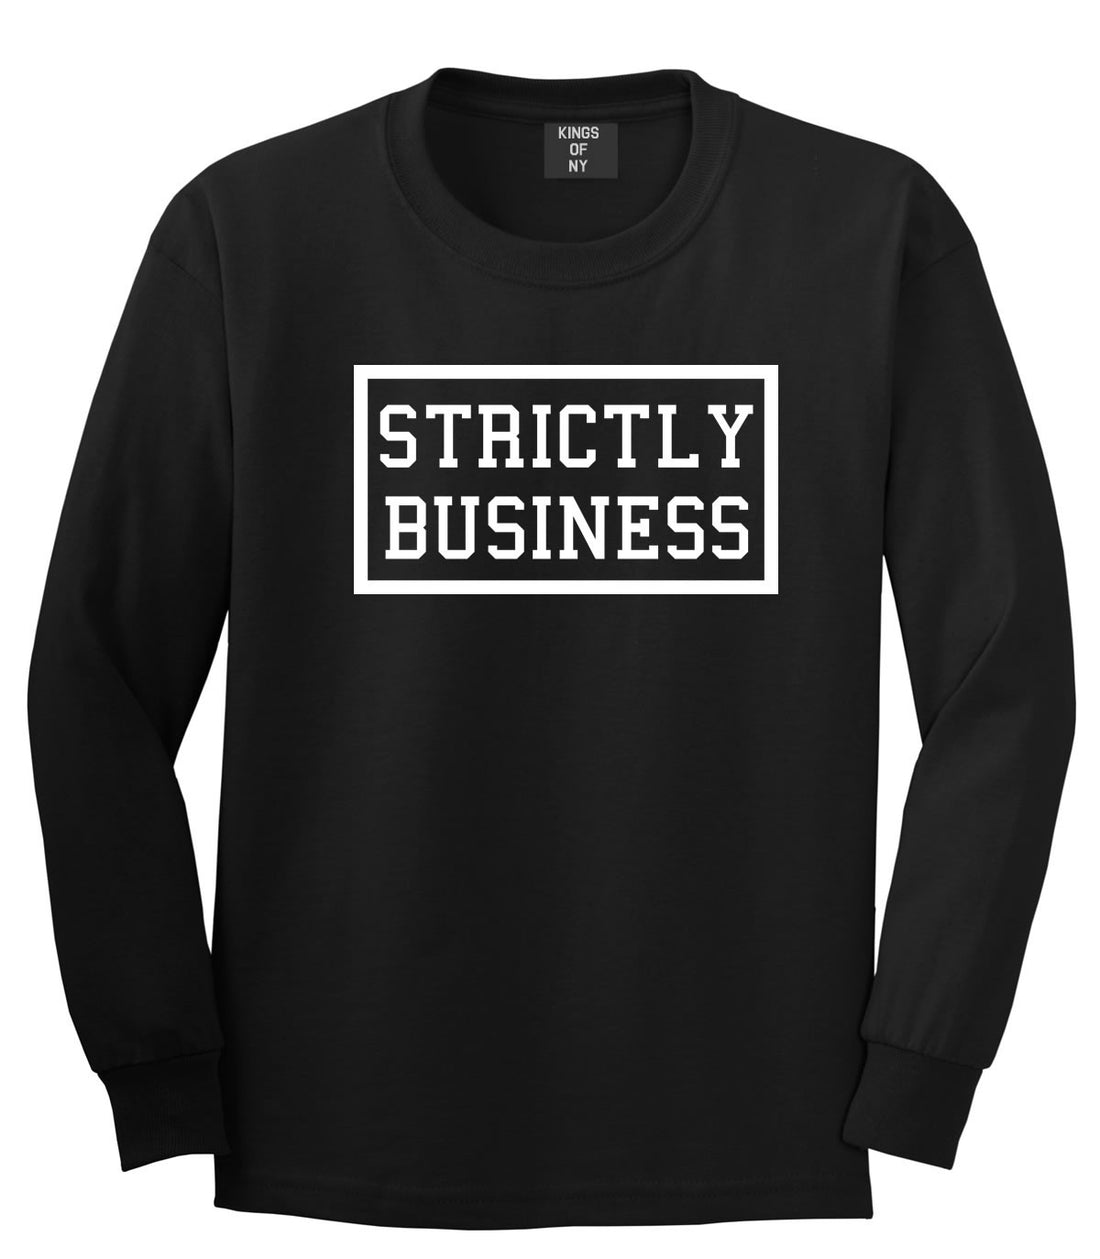 Strictly Business Long Sleeve T-Shirt in Black by Kings Of NY